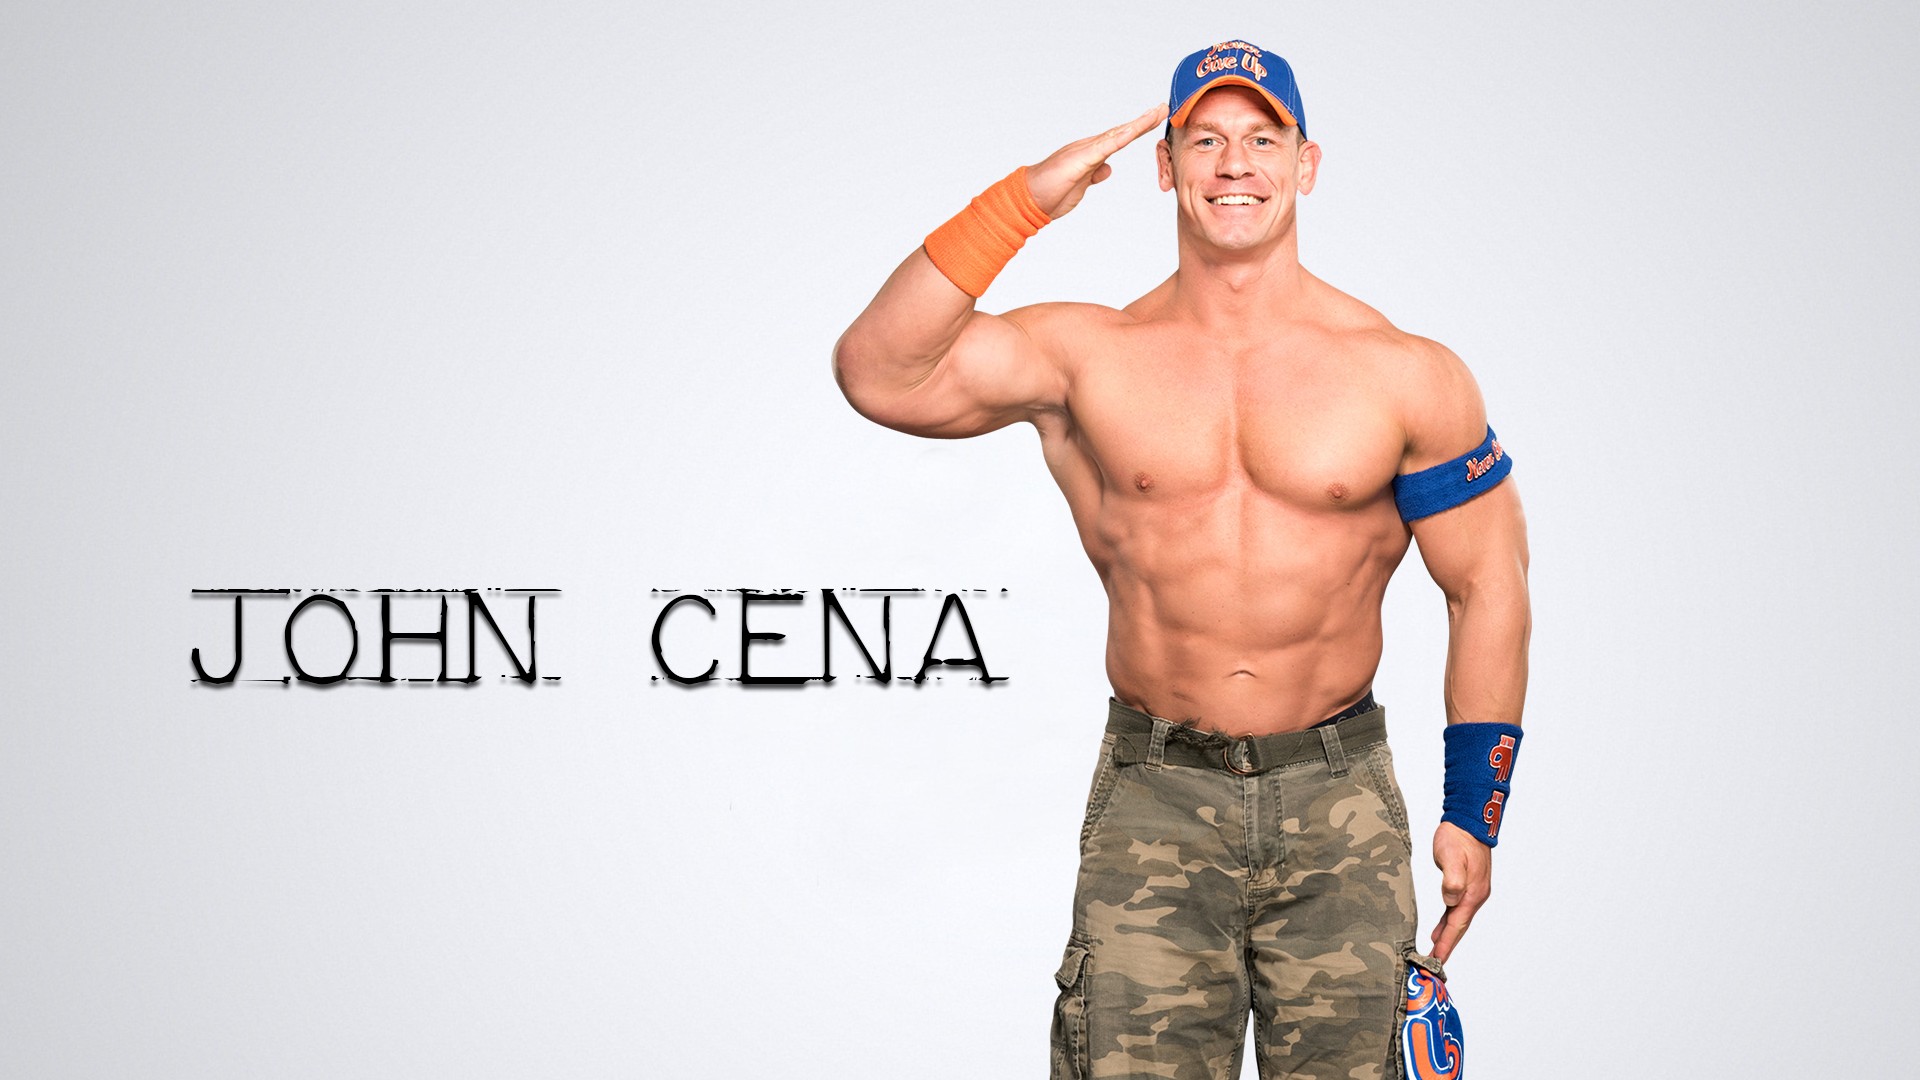 Download free John Cena Wallpapers Full HD 29409 available in different hig...